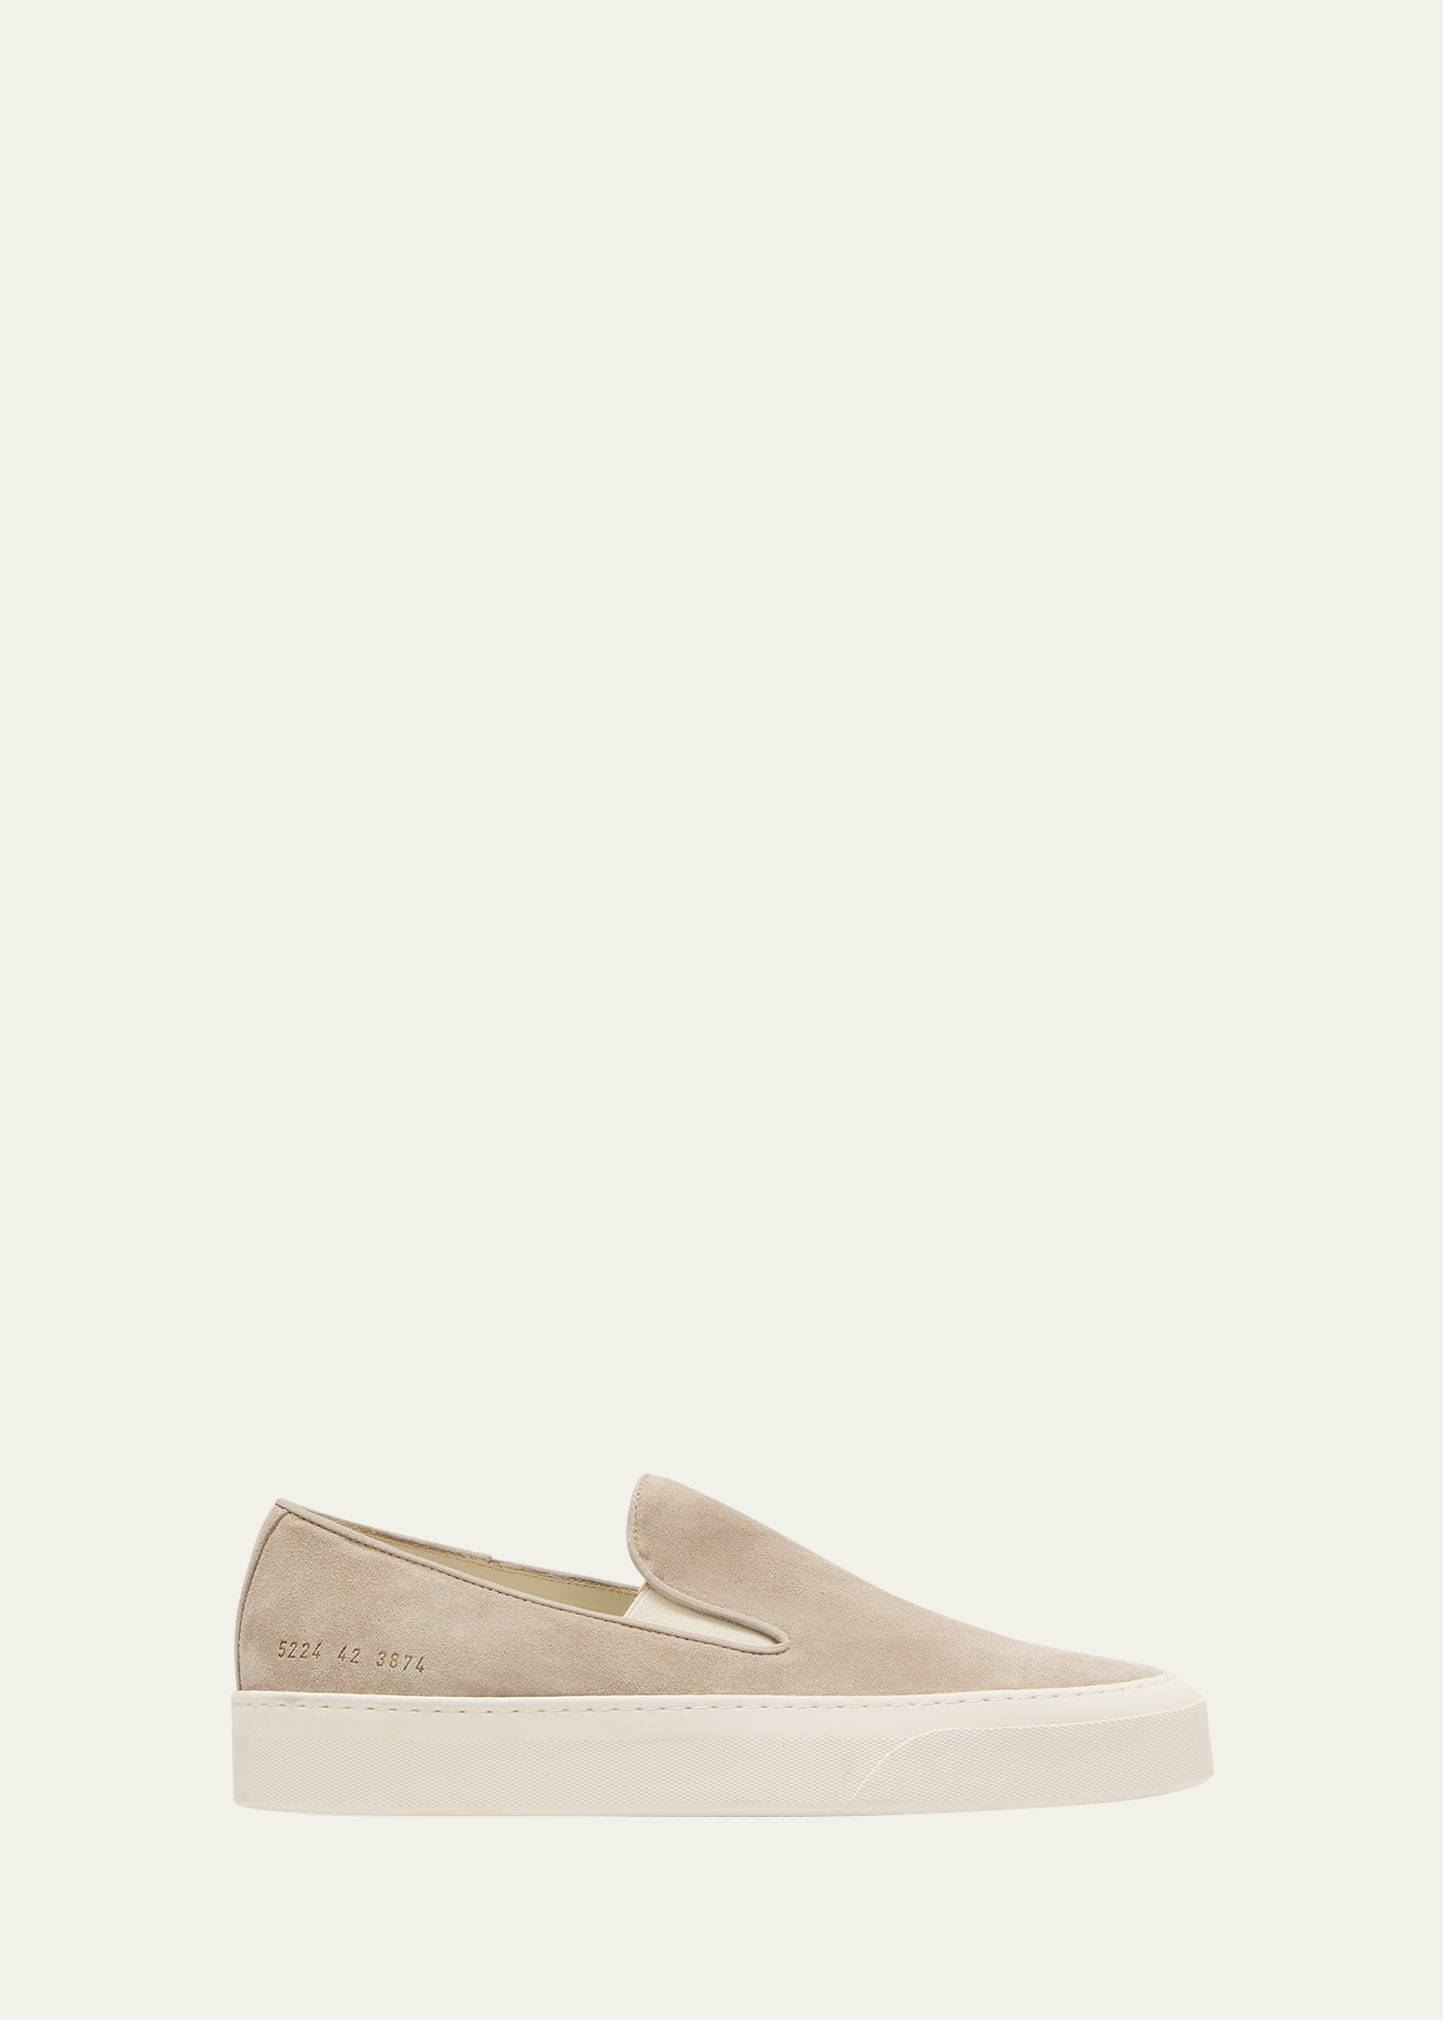 Shop Common Projects Men's Suede Slip-on Sneakers In Warm Gray